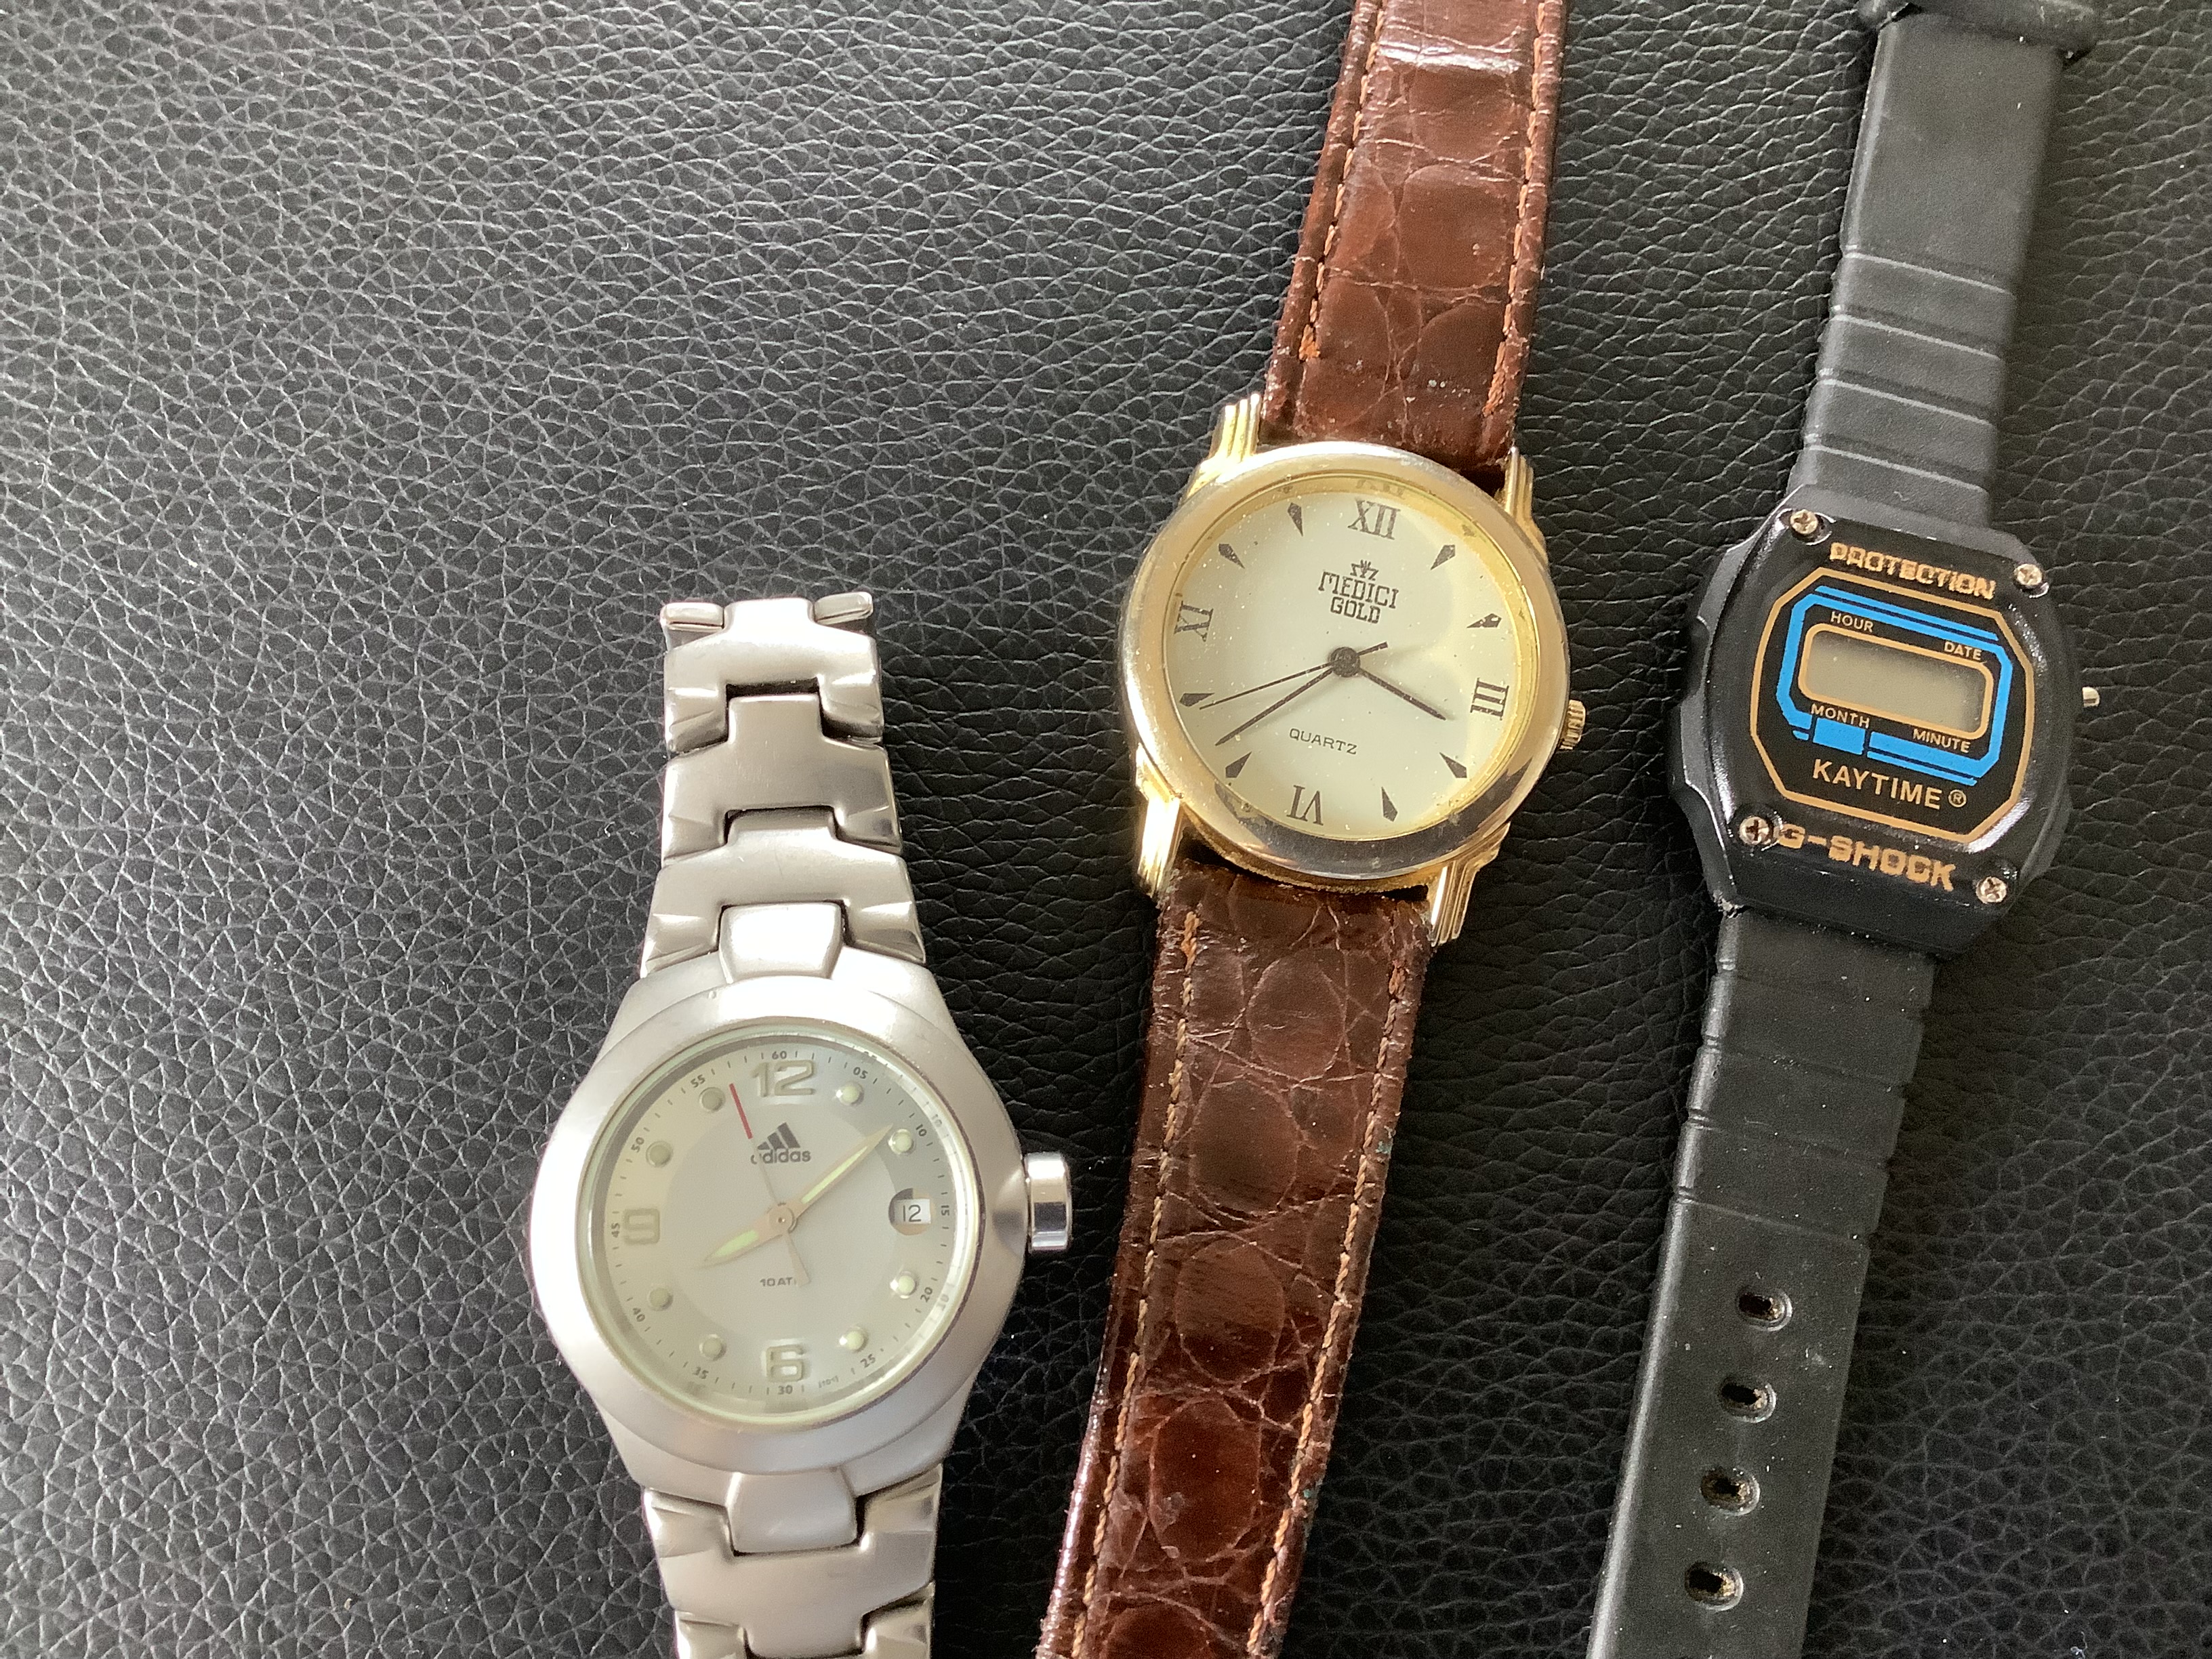 Collection of 3 Watches, Adidas, Medici Gold & Kaytime Wristwatches (GS 184) Here are 3 little - Image 3 of 3